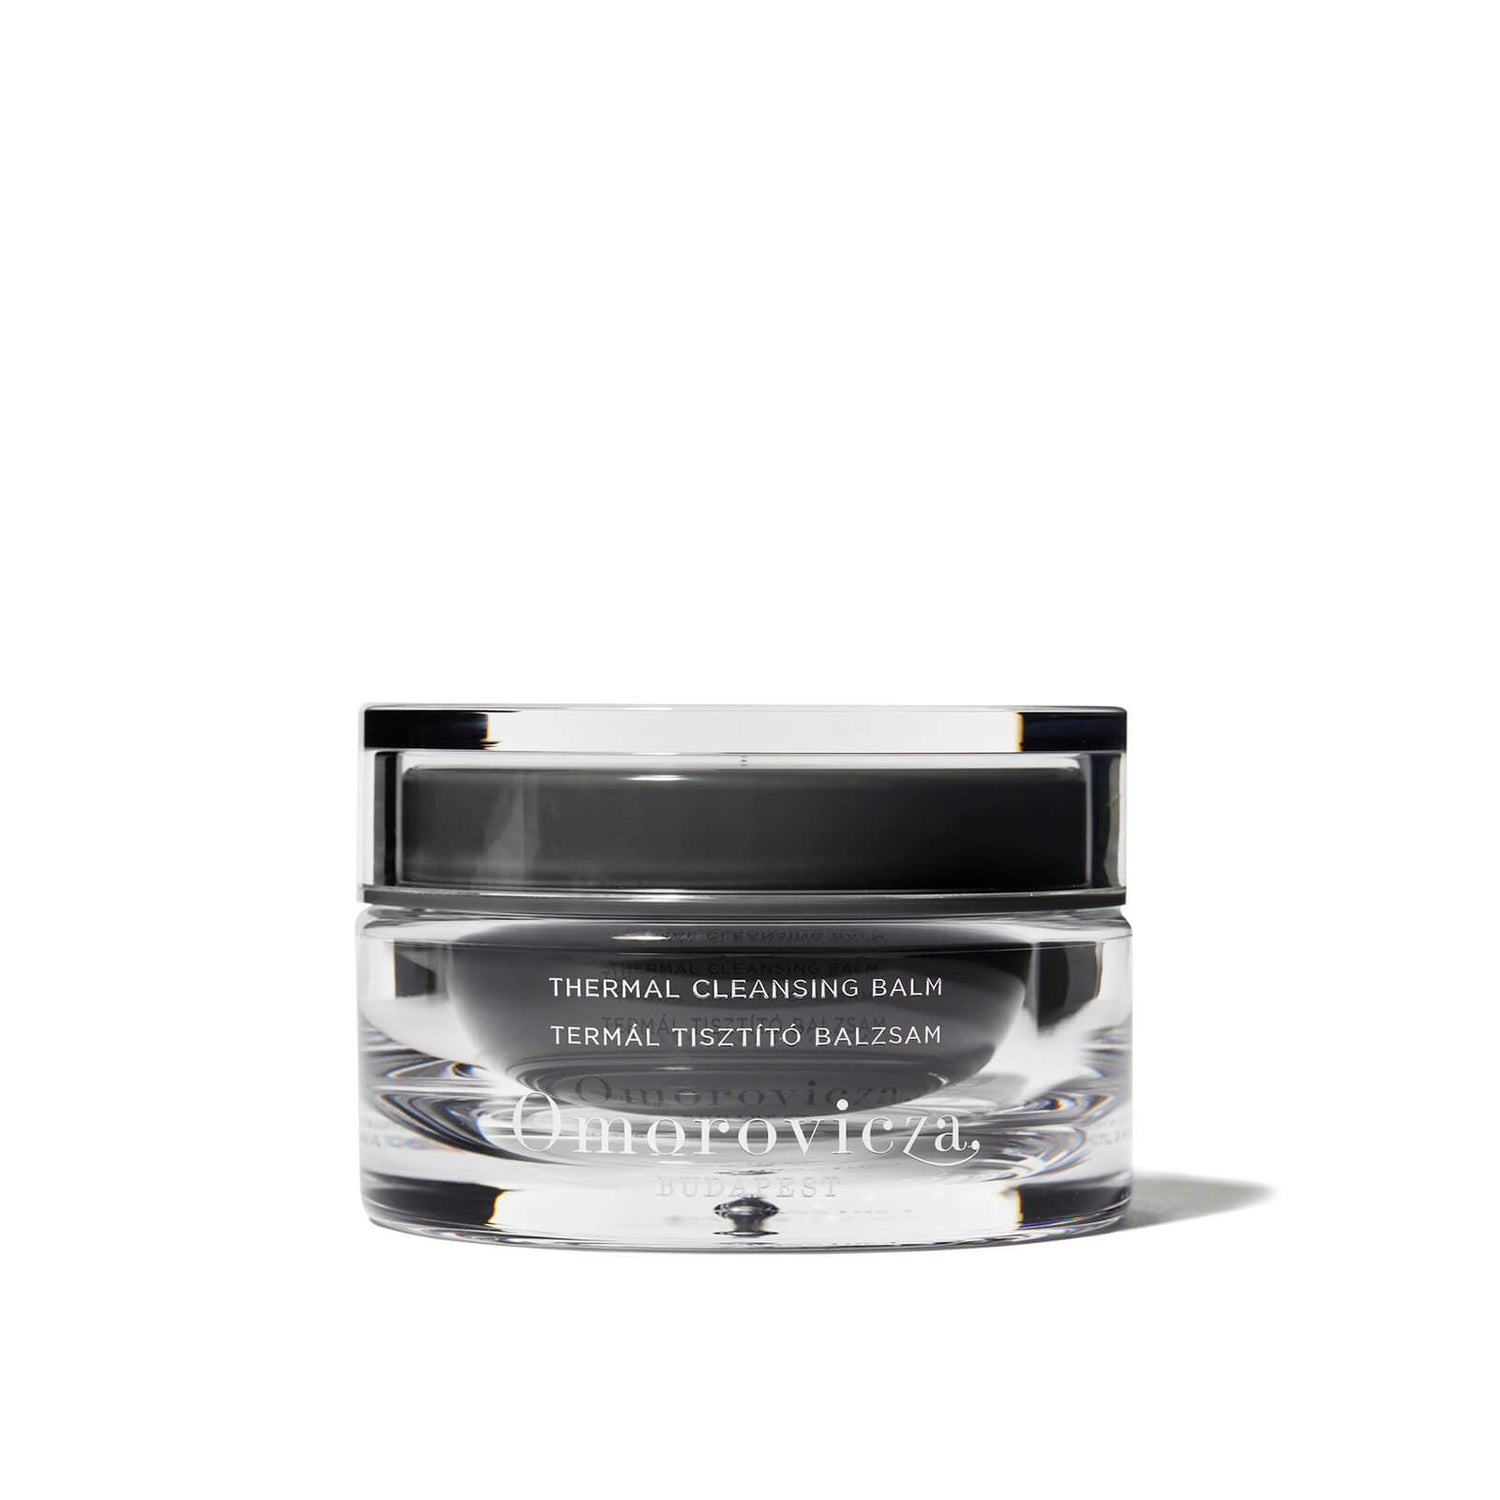 Omorovicza Thermal Cleansing Balm Supersize -3 oz